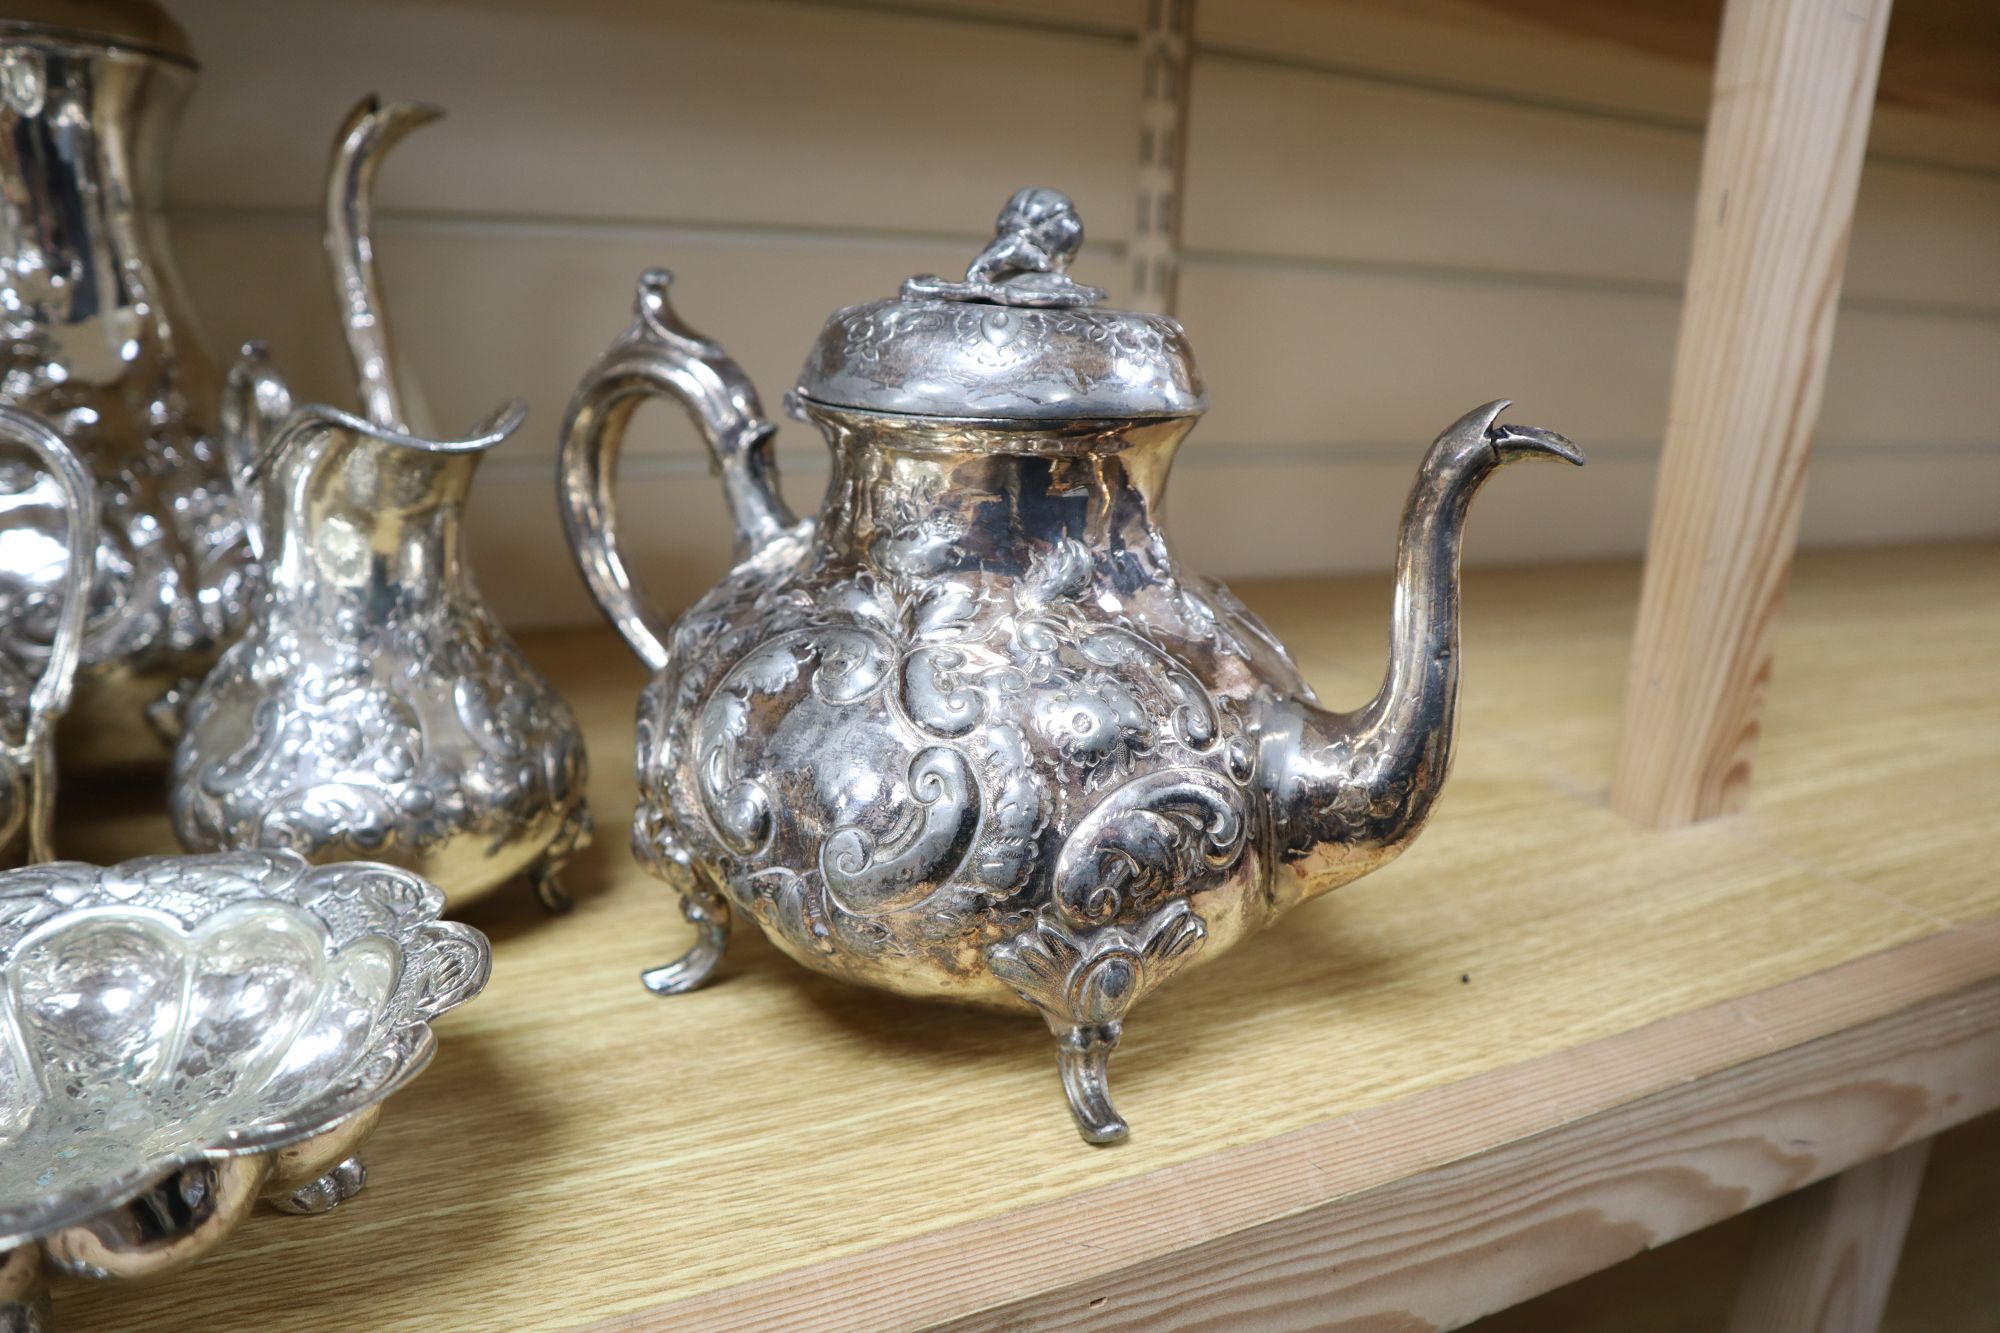 A three-piece plated teaset, sundry plated items and a leather box with plated mounts